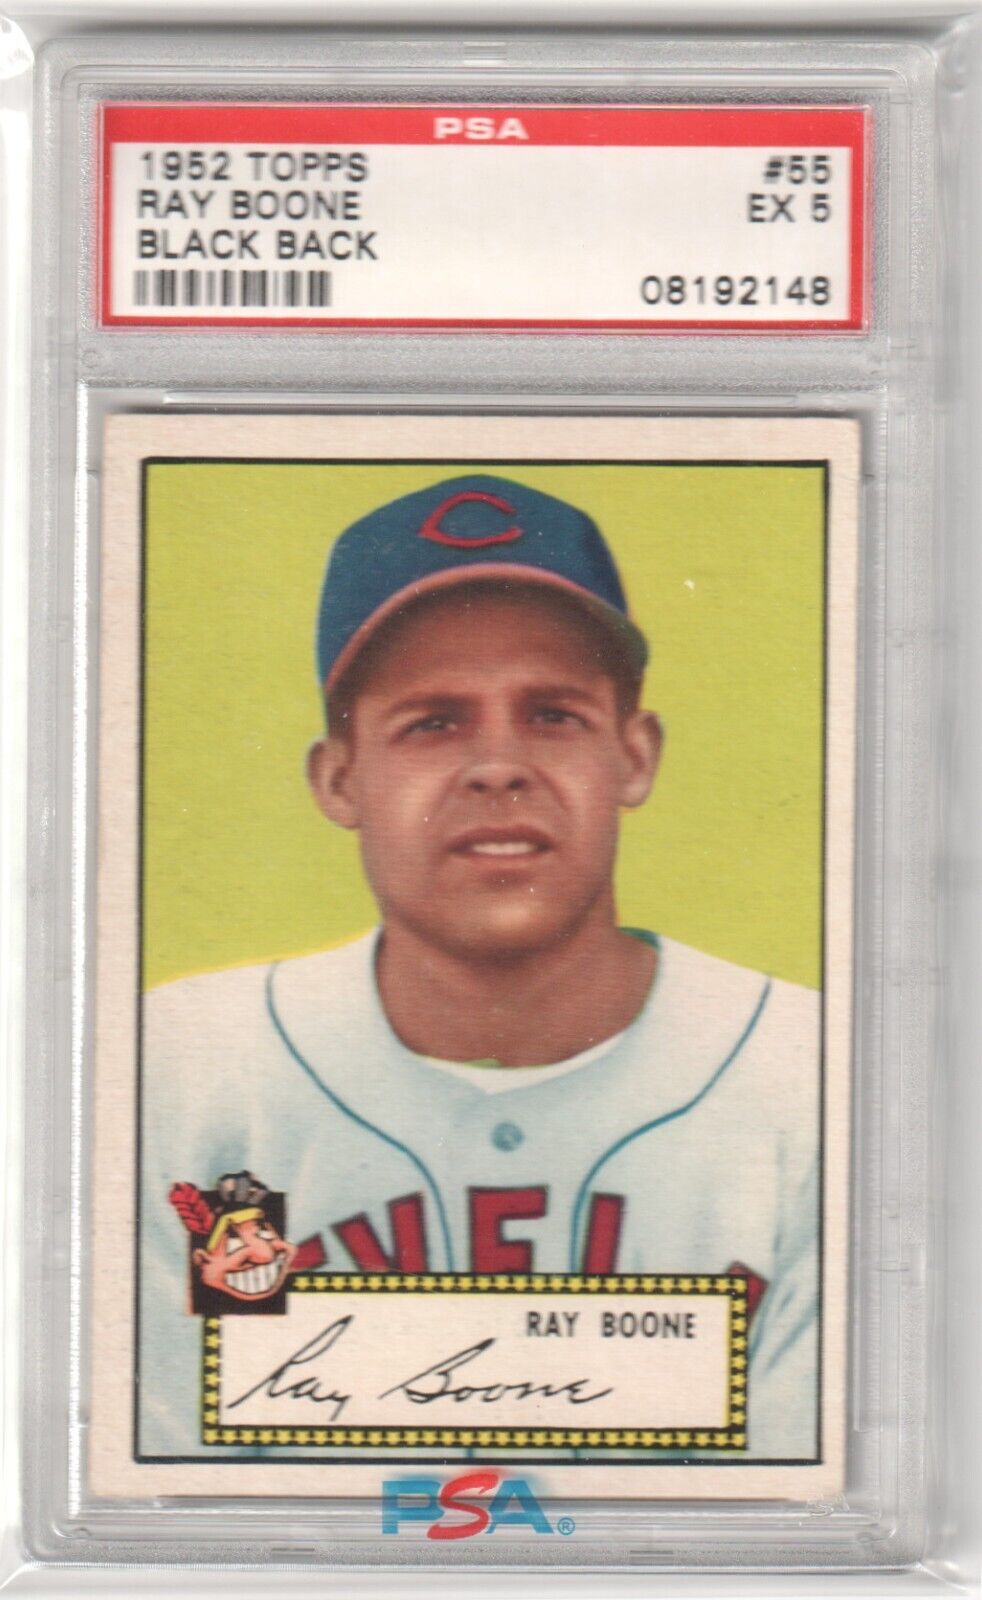 RAY BOONE 1952 Topps Black Back #55 PSA 5 EX - INDIANS